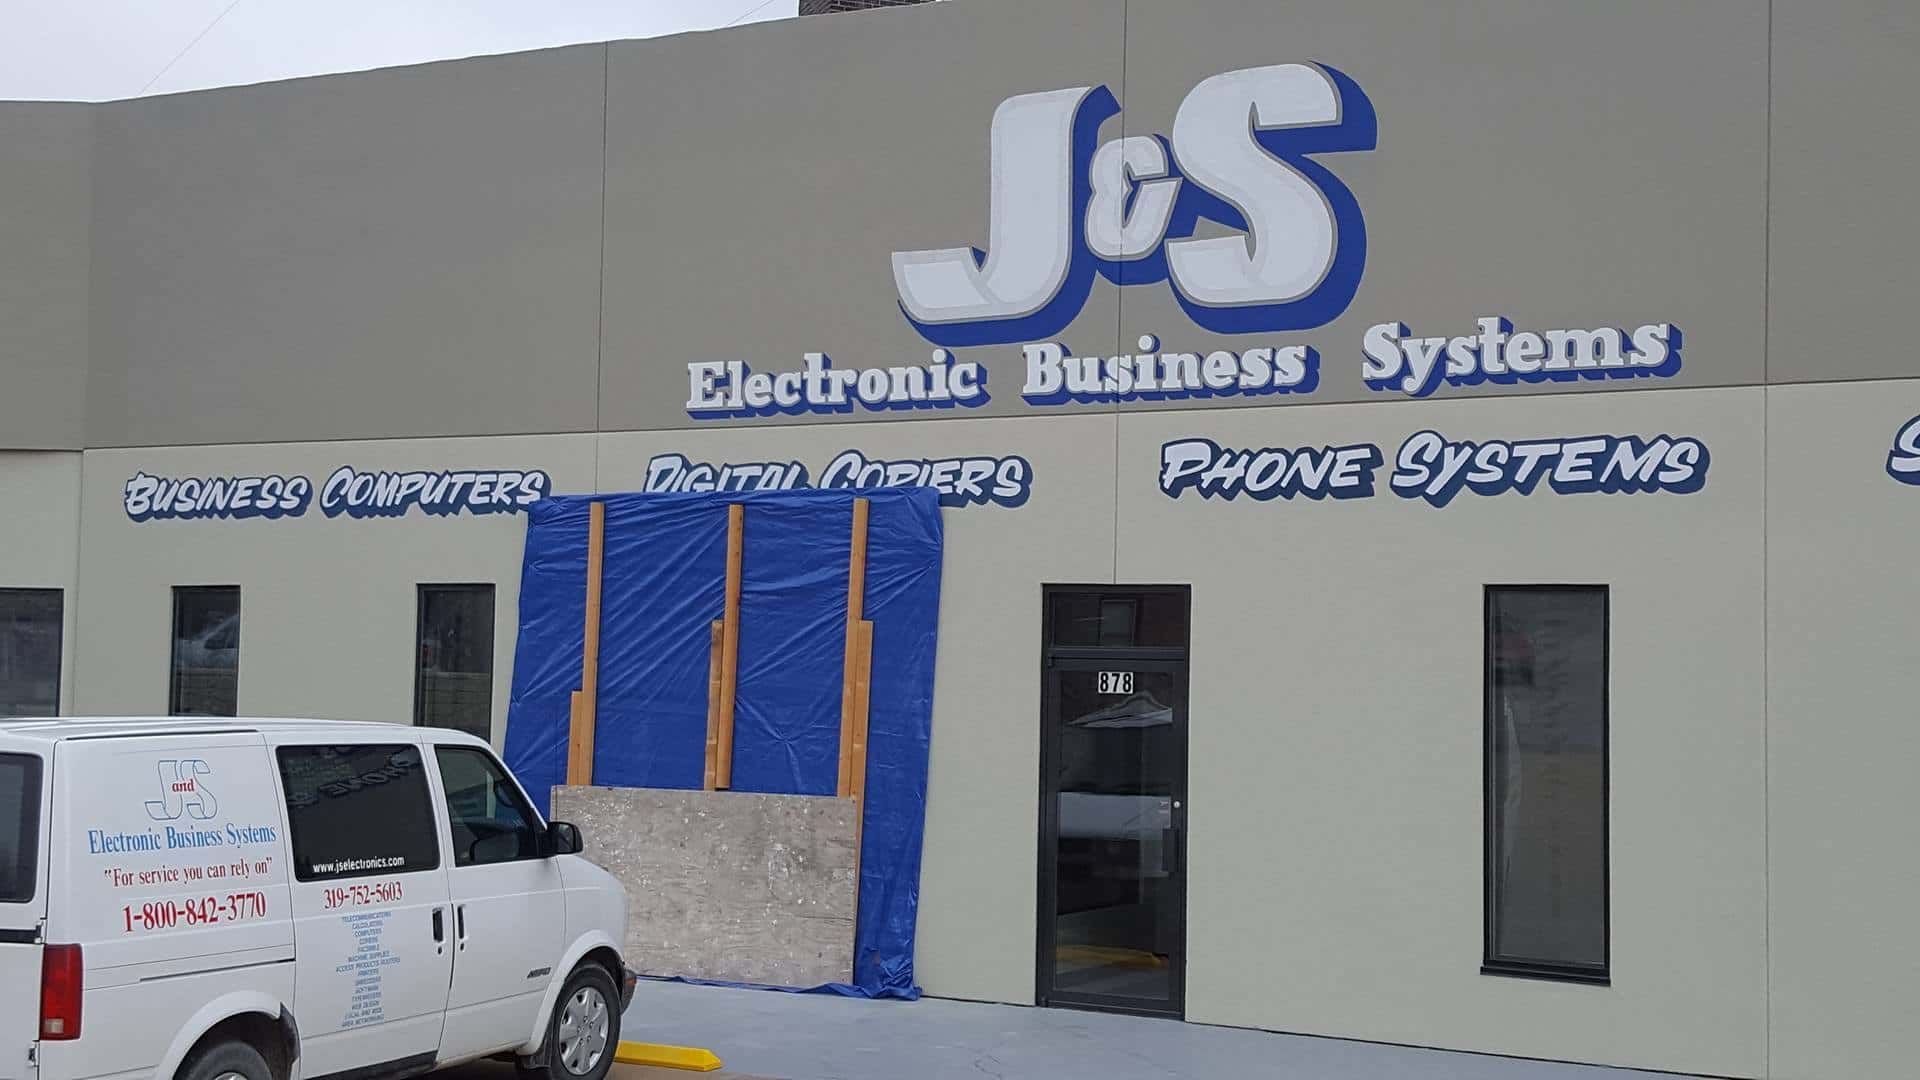 Damage to J&S Electronic Business Systems, the morning after a car crashed into the building.